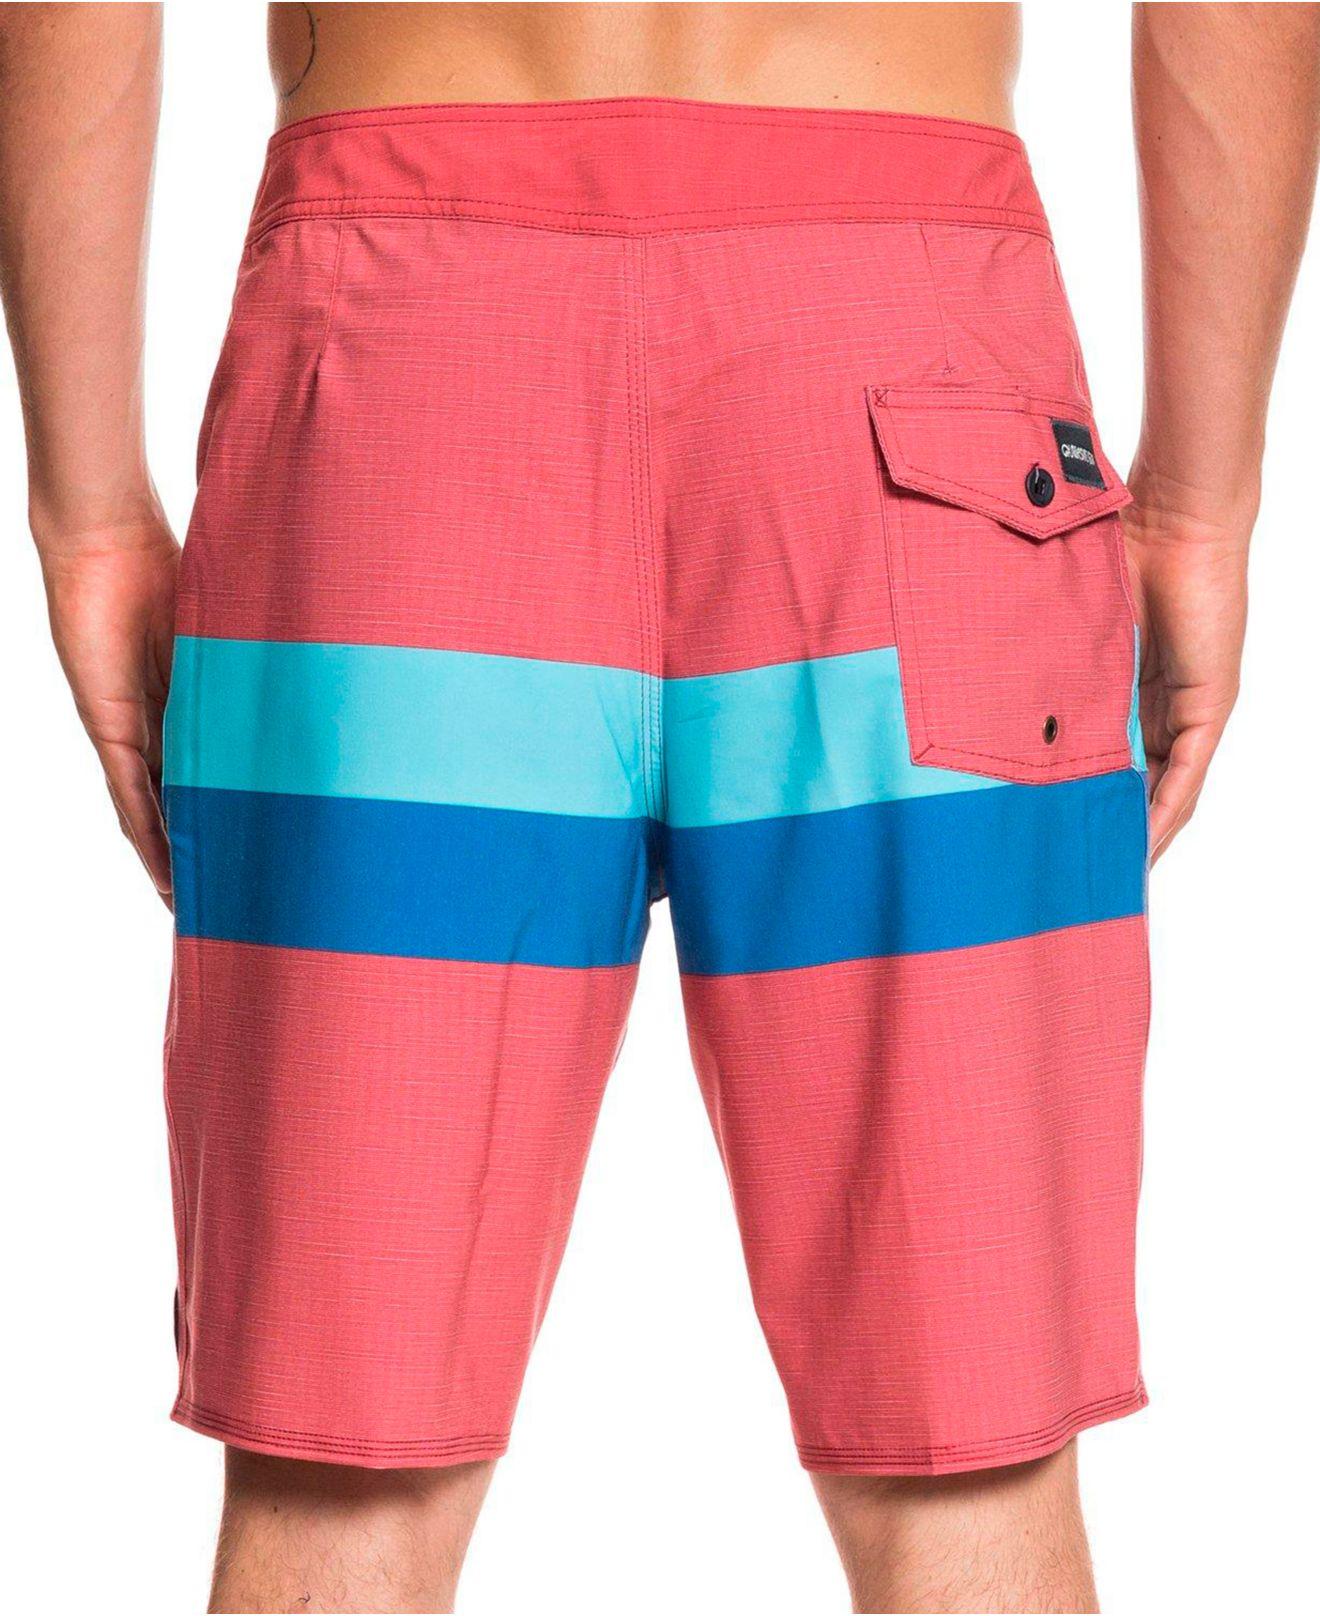 Quiksilver Board Shorts in Red for Men - Lyst Quiksilver Shorts Red